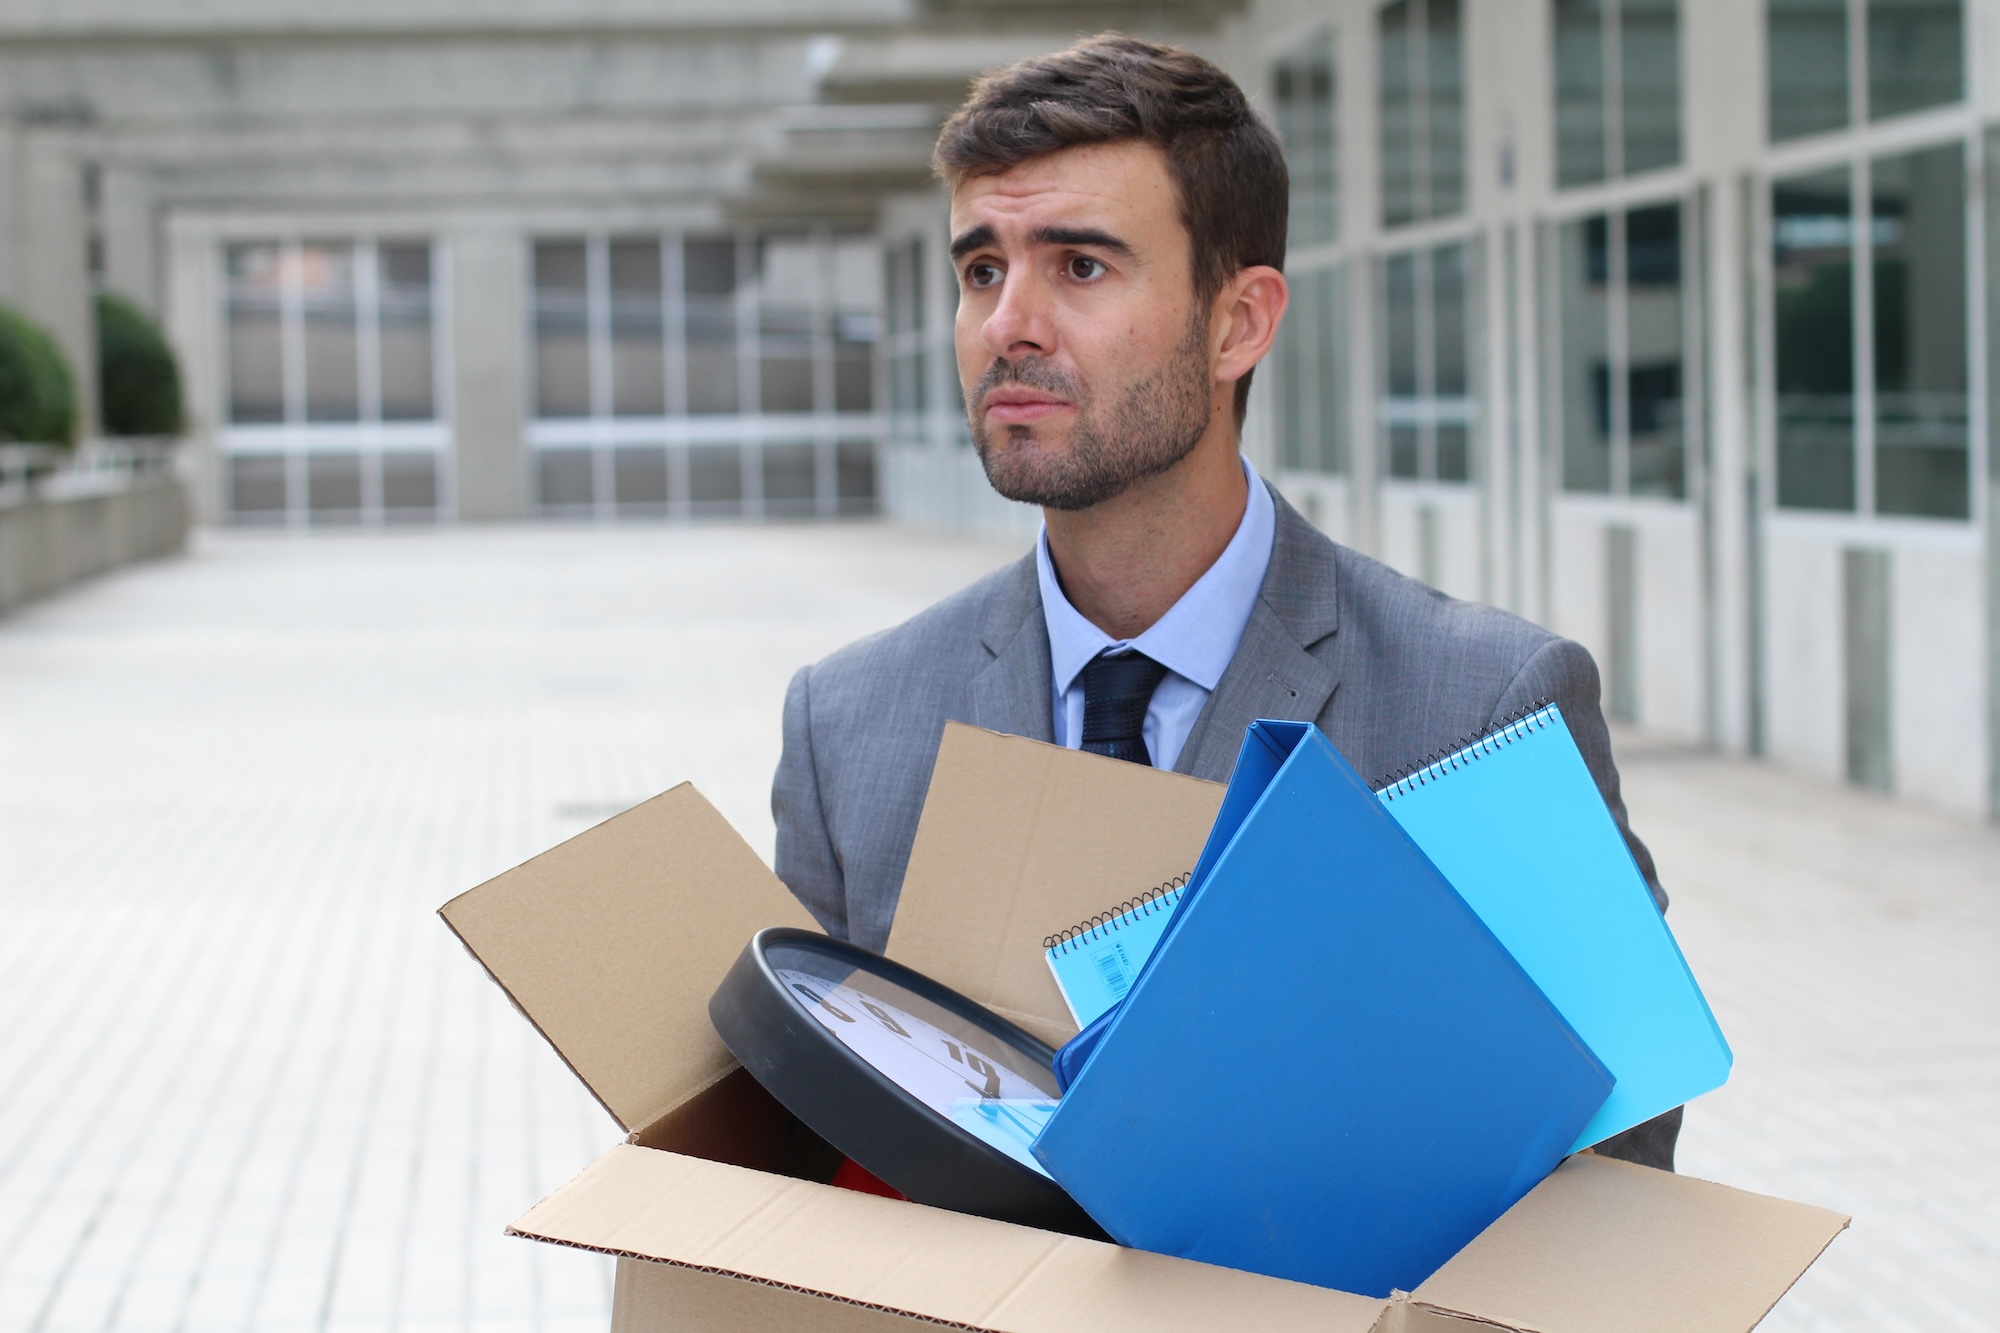 Photograph of a man who has just been fired, walking in front of an office building, a cardboard box with his things (including two blue folders and an analog clock) in his arms.